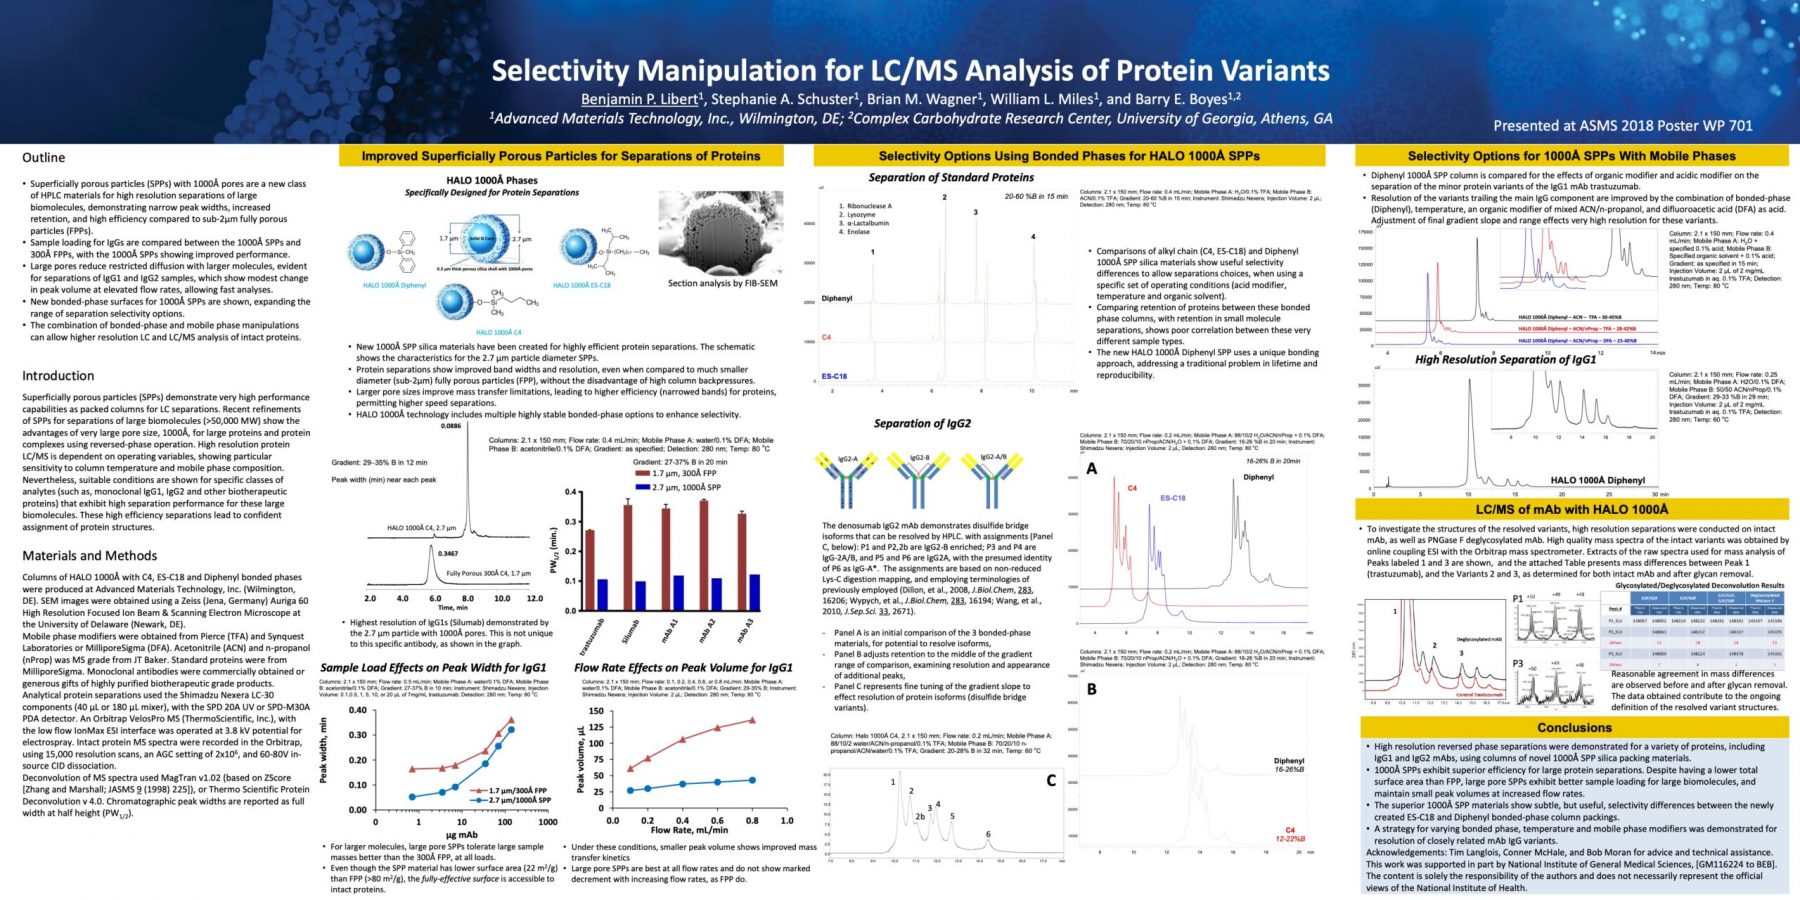 selectivity manipulation for lc/ms analysis of prrotein variants